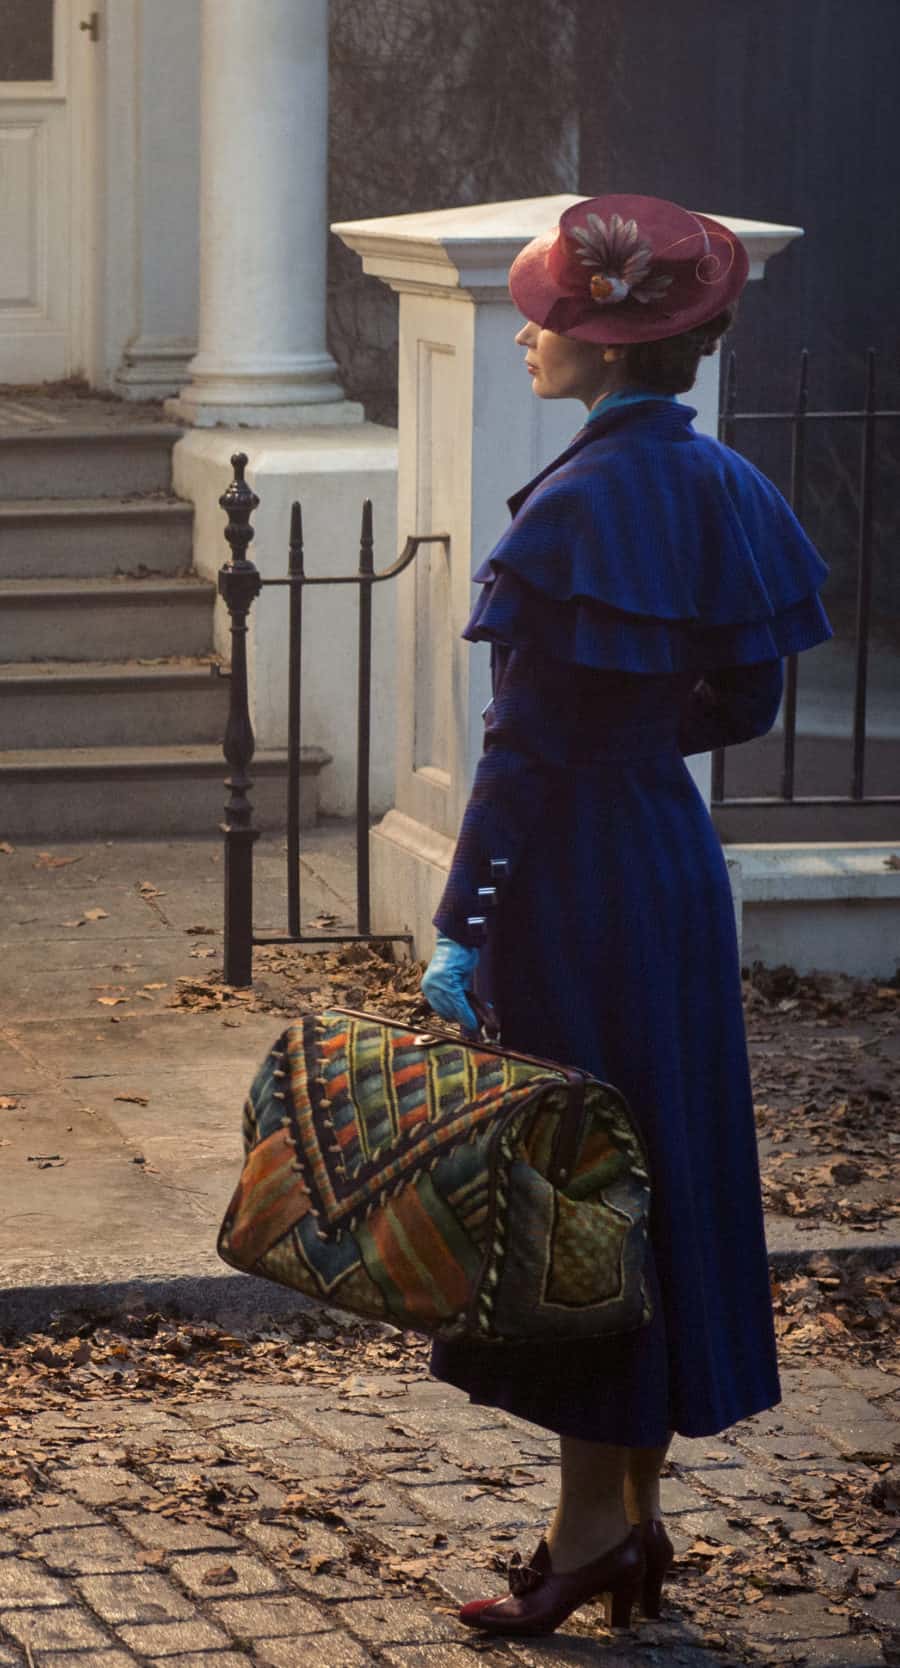 Mary Poppins (Emily Blunt) returns to the Banks home after many years and uses her magical skills to help the now grown up Michael and Jane rediscover the joy and wonder missing in their lives in MARY POPPINS RETURNS, directed by Rob Marshall.